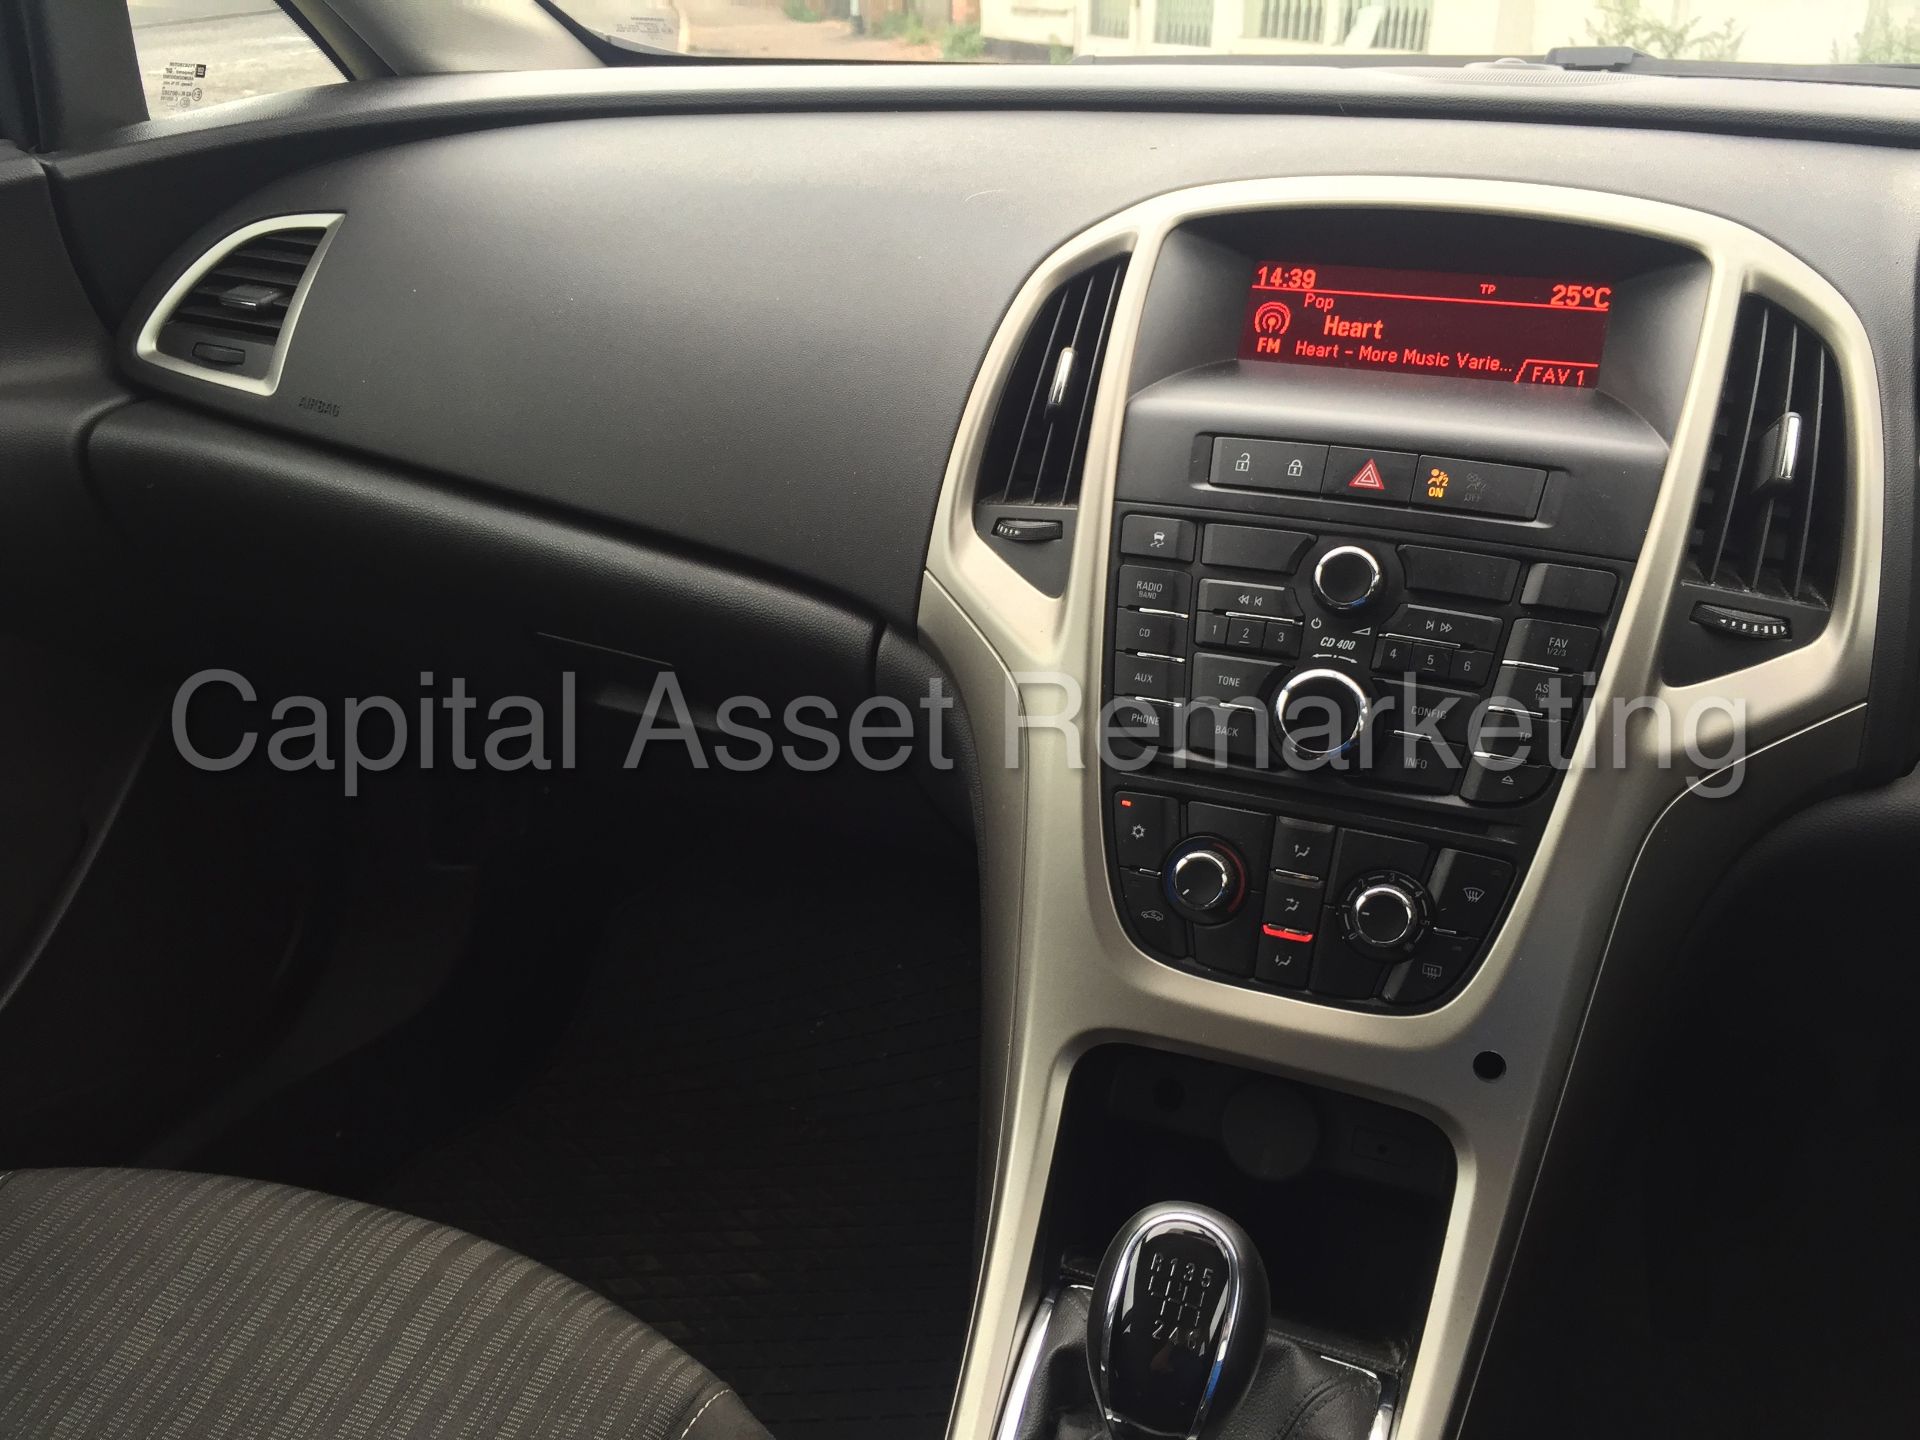 VAUXHALL ASTRA 'EXCLUSIVE' (2012 MODEL) '1.7 CDTI - ECOFLEX - 6 SPEED' *AIR CON* NO VAT - Image 10 of 24